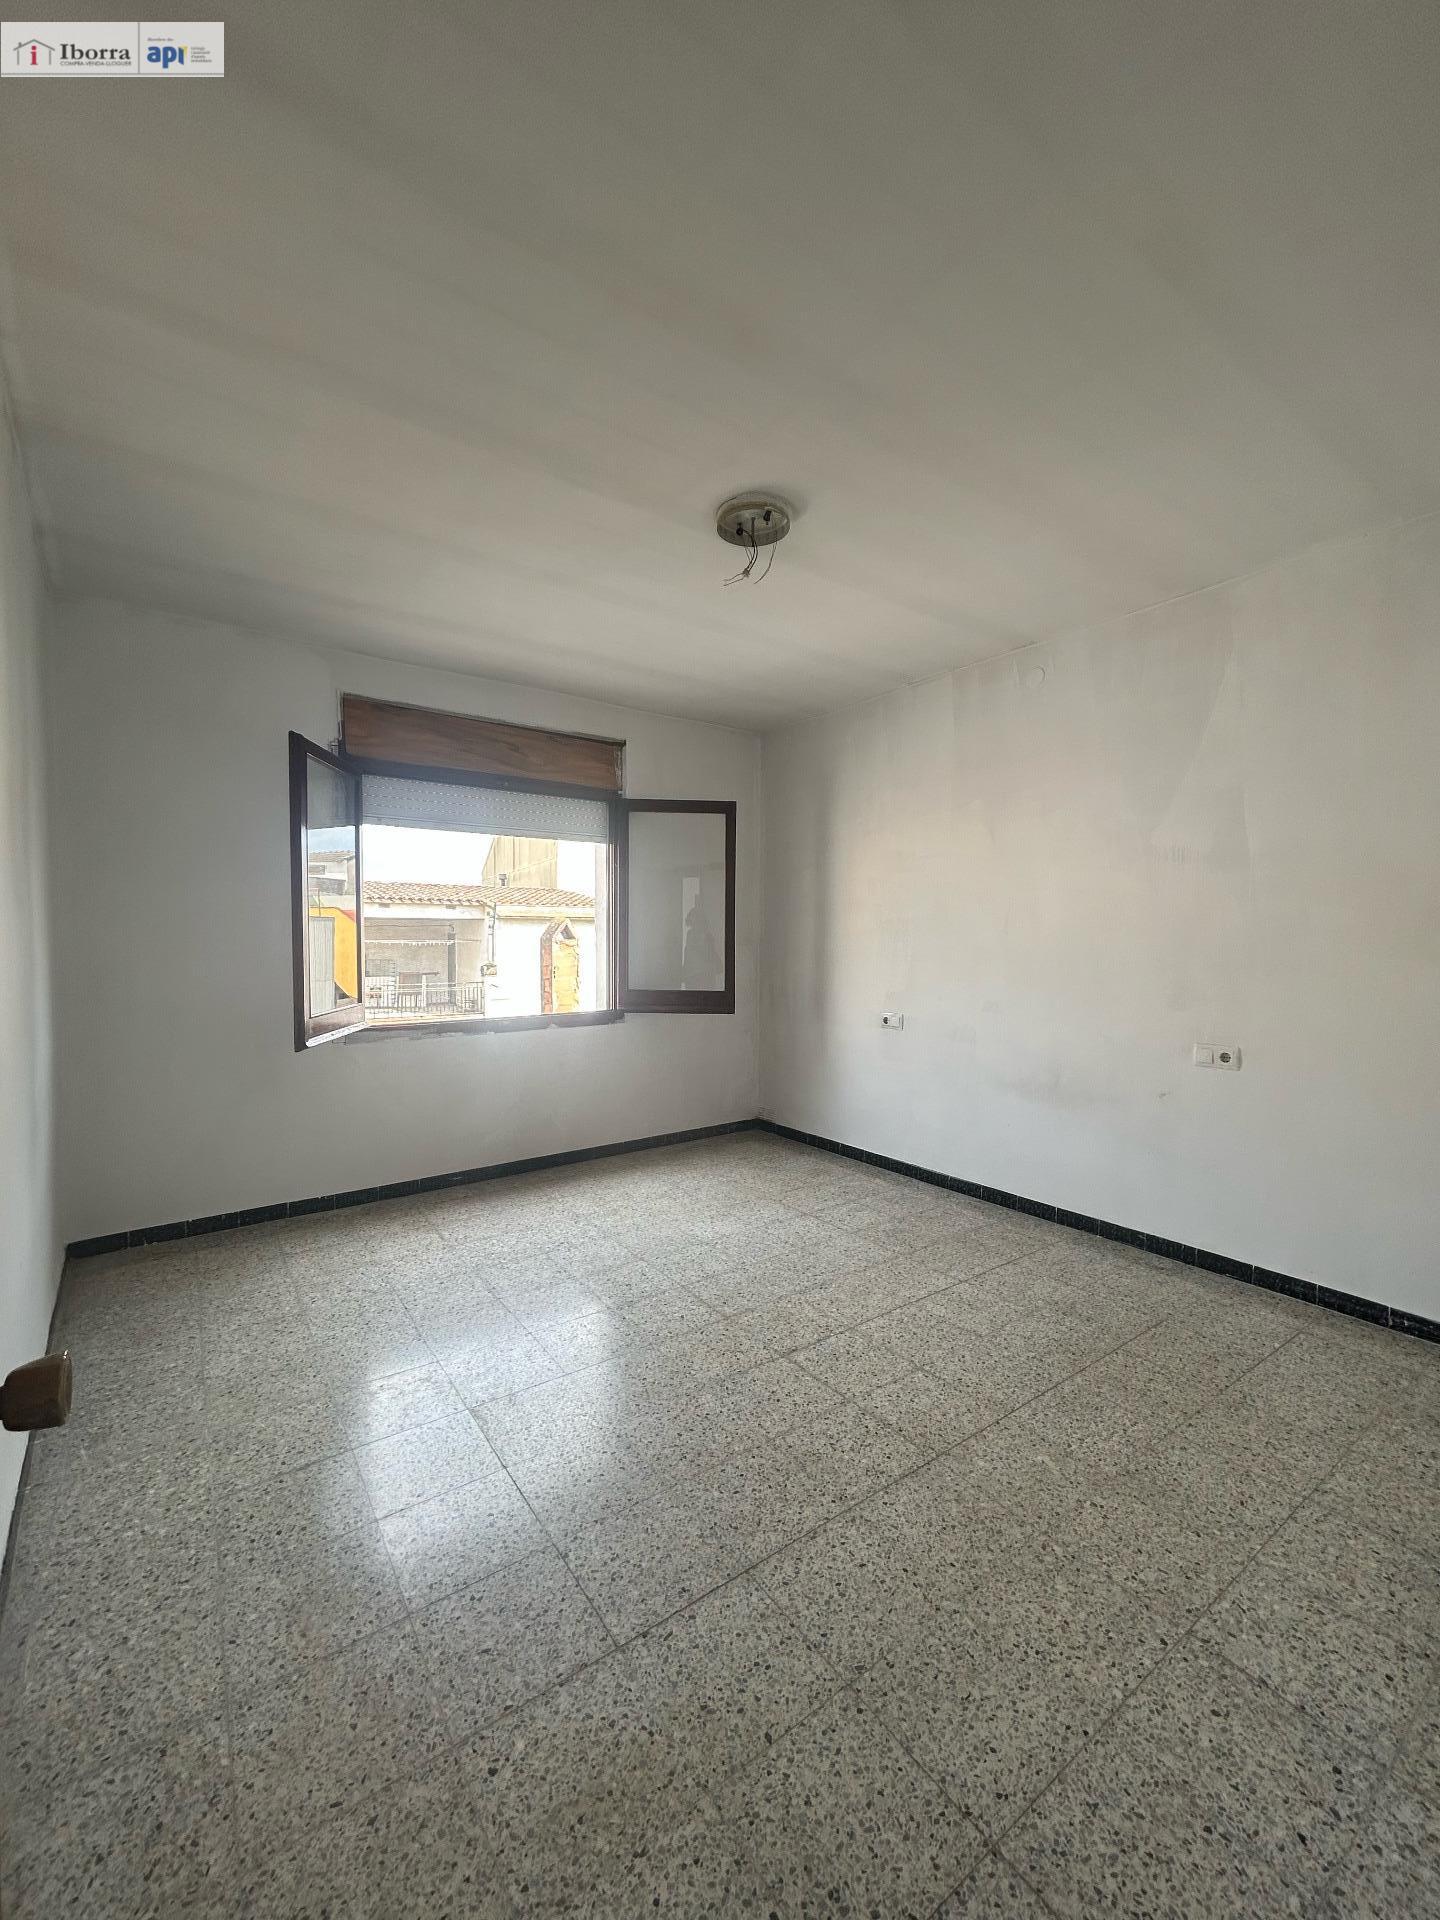 House For sale Tordera